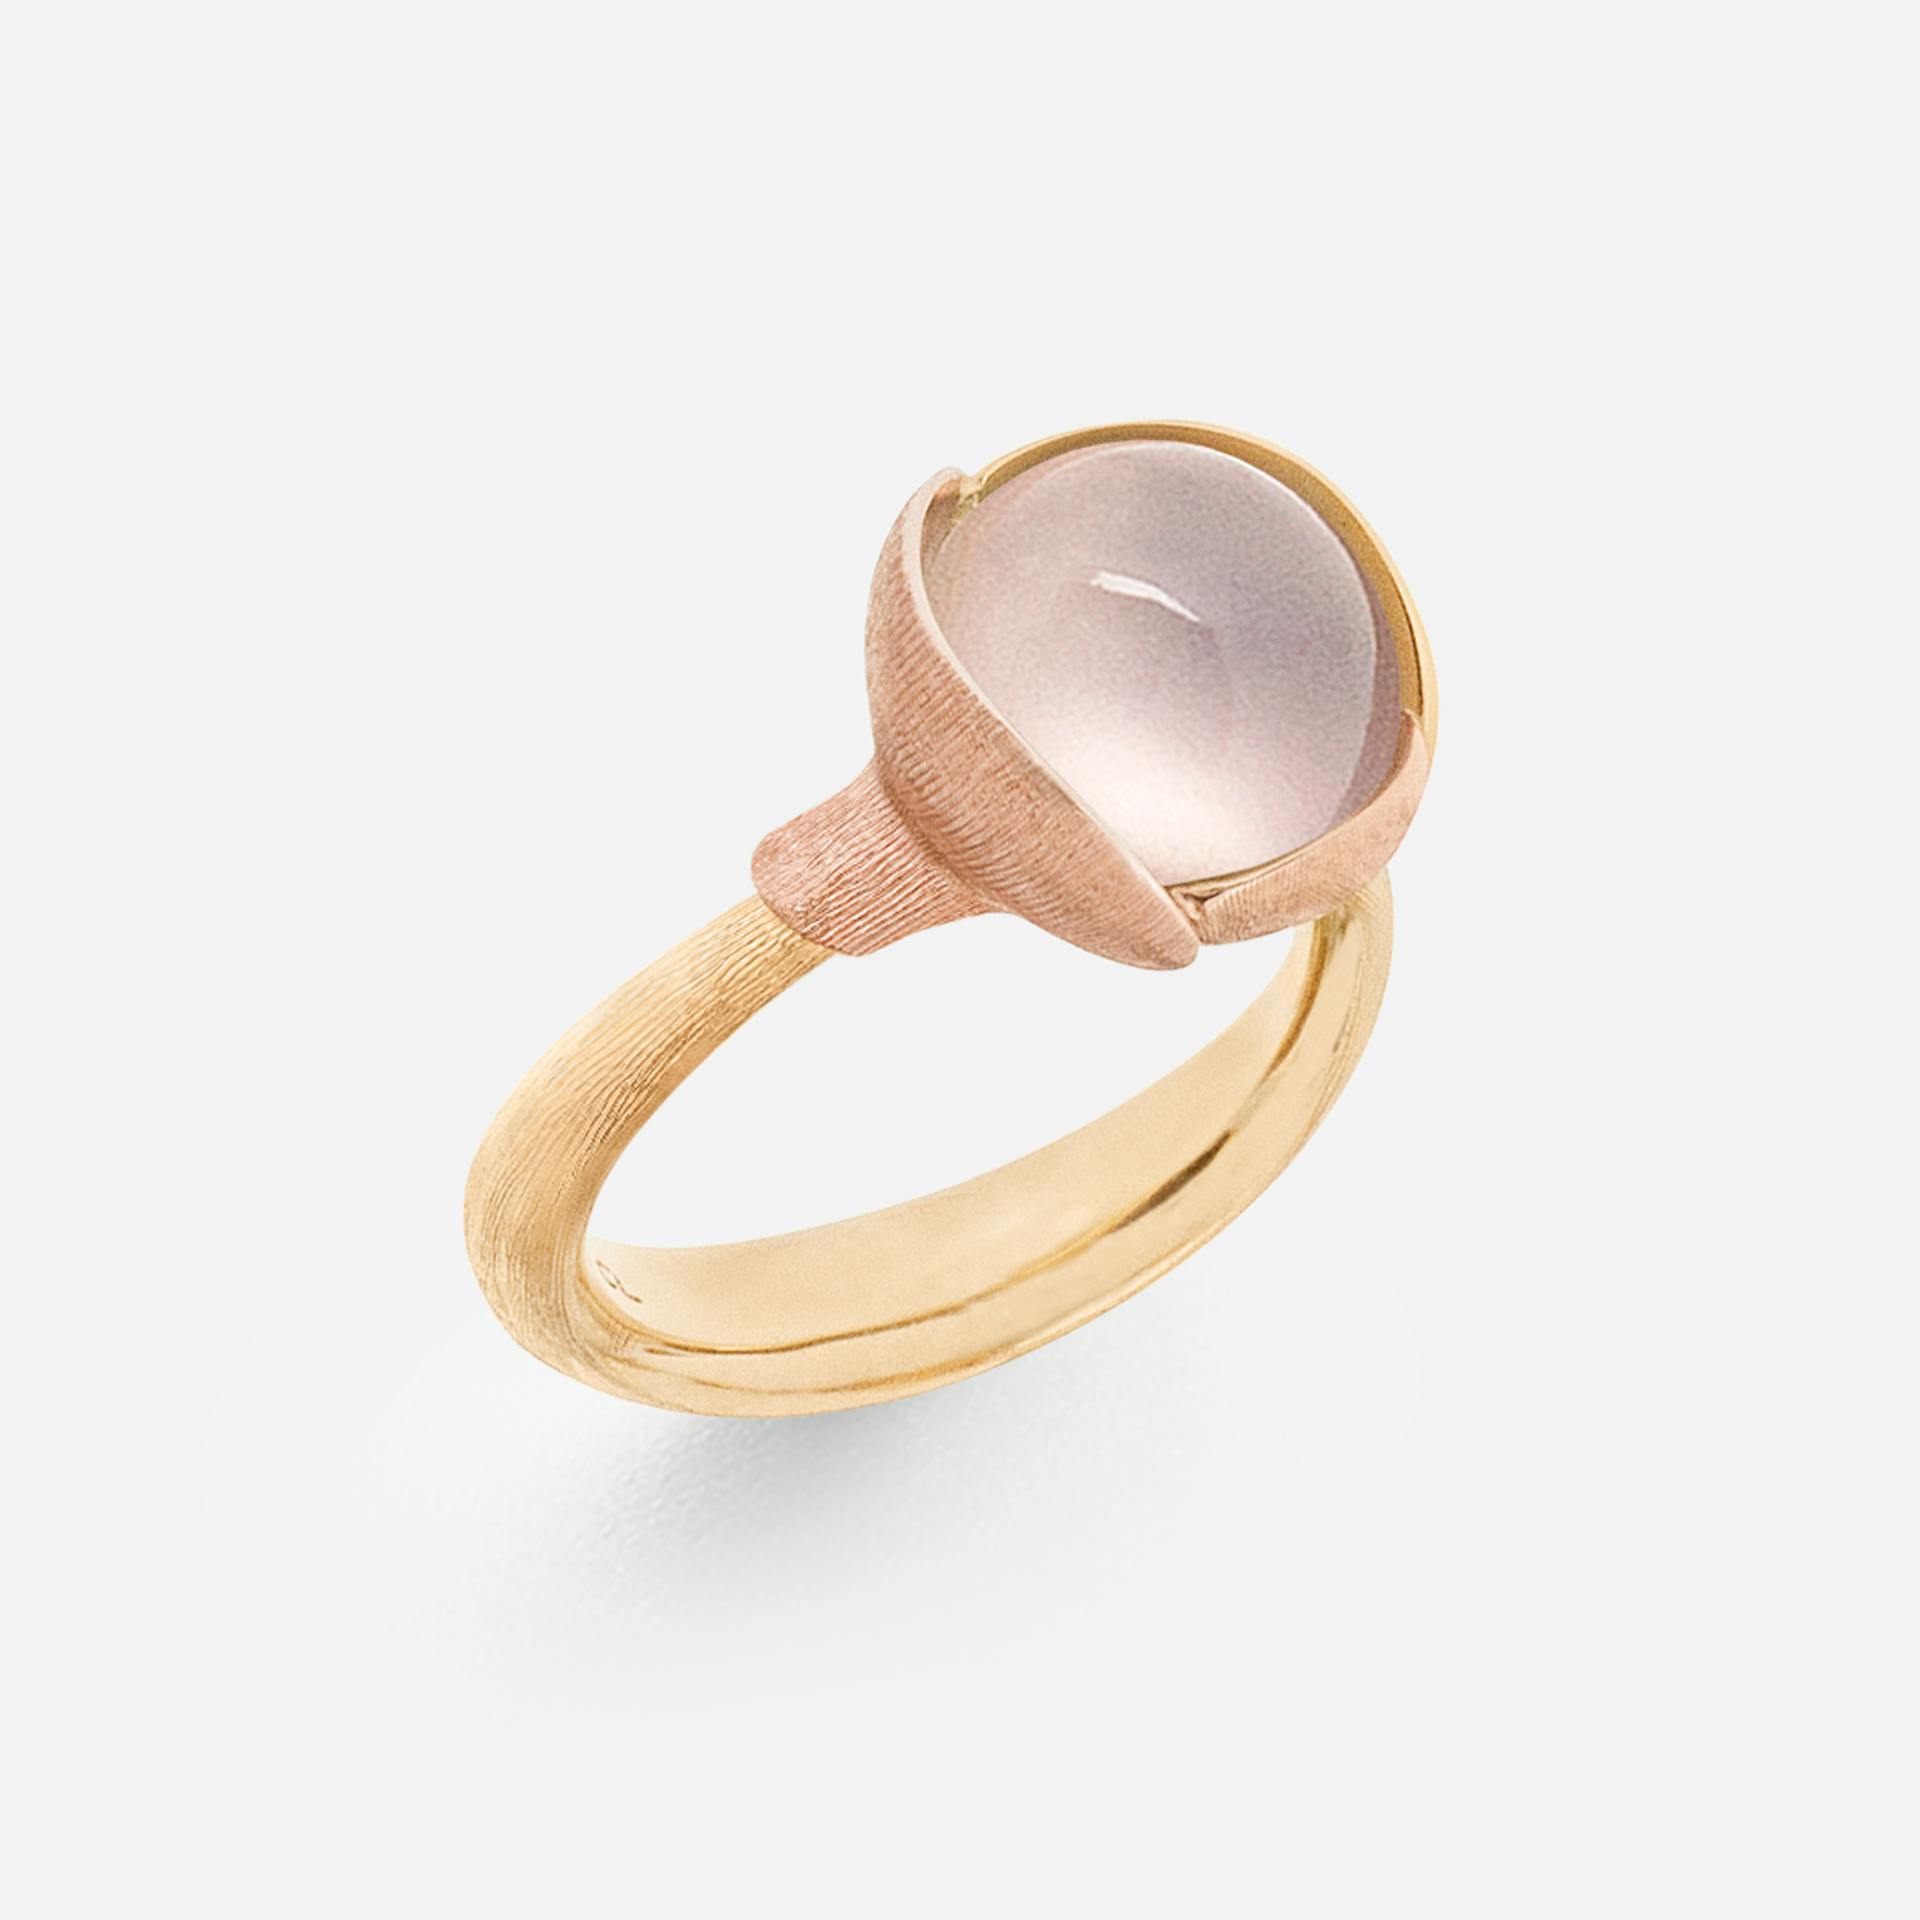 Lotus Ring size 2 in Yellow and Rose Gold  with Rose Quartz  |  Ole Lynggaard Copenhagen